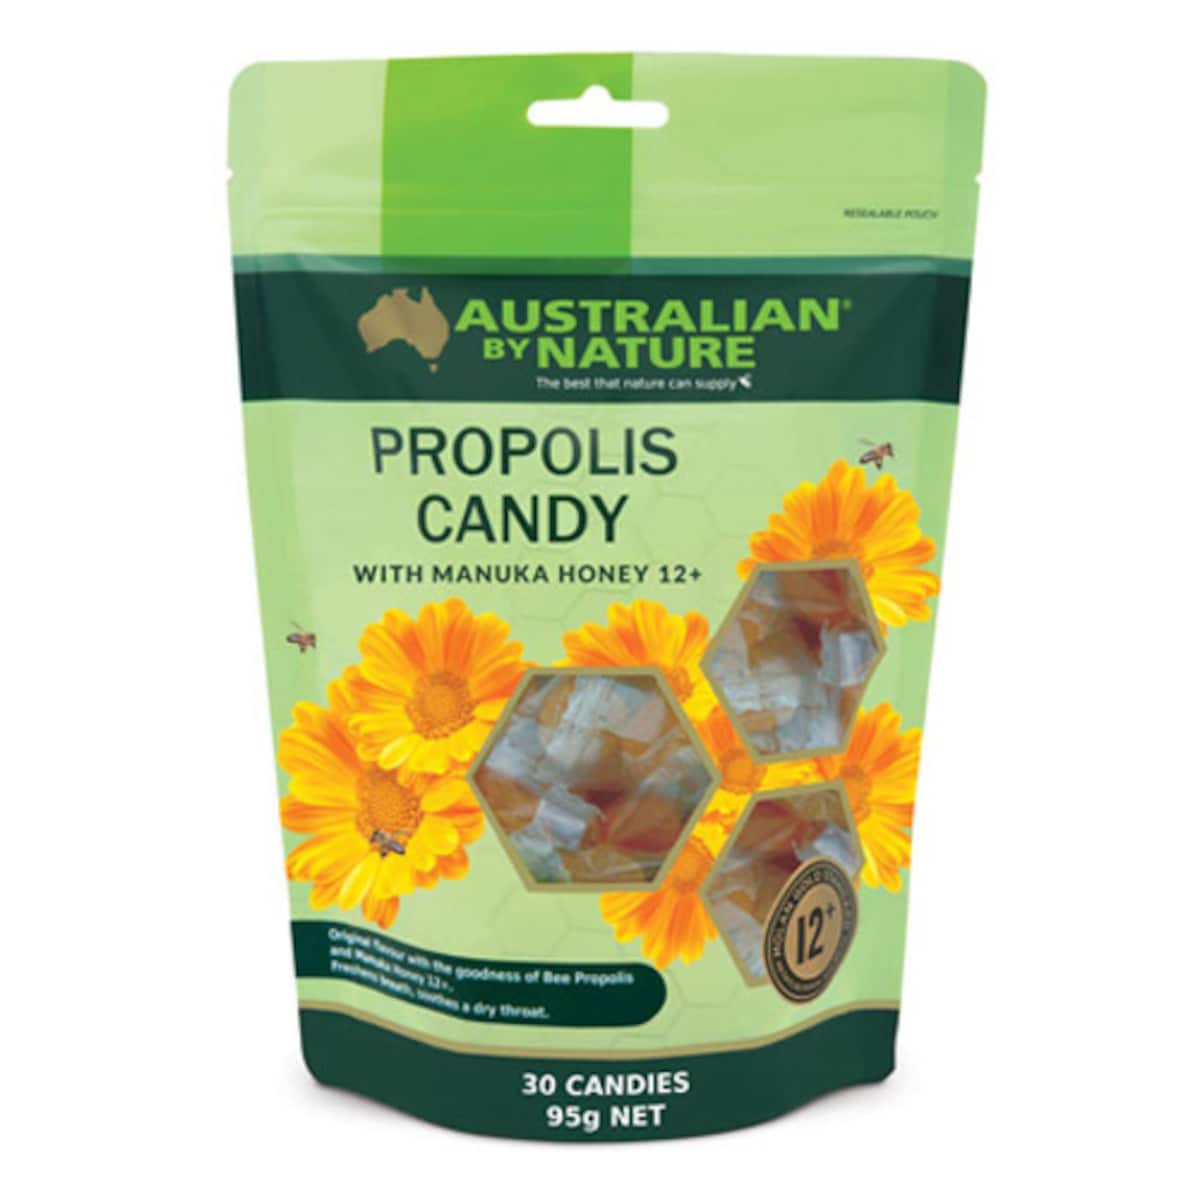 Australian by Nature Propolis Candy with Manuka Honey 30 Candies